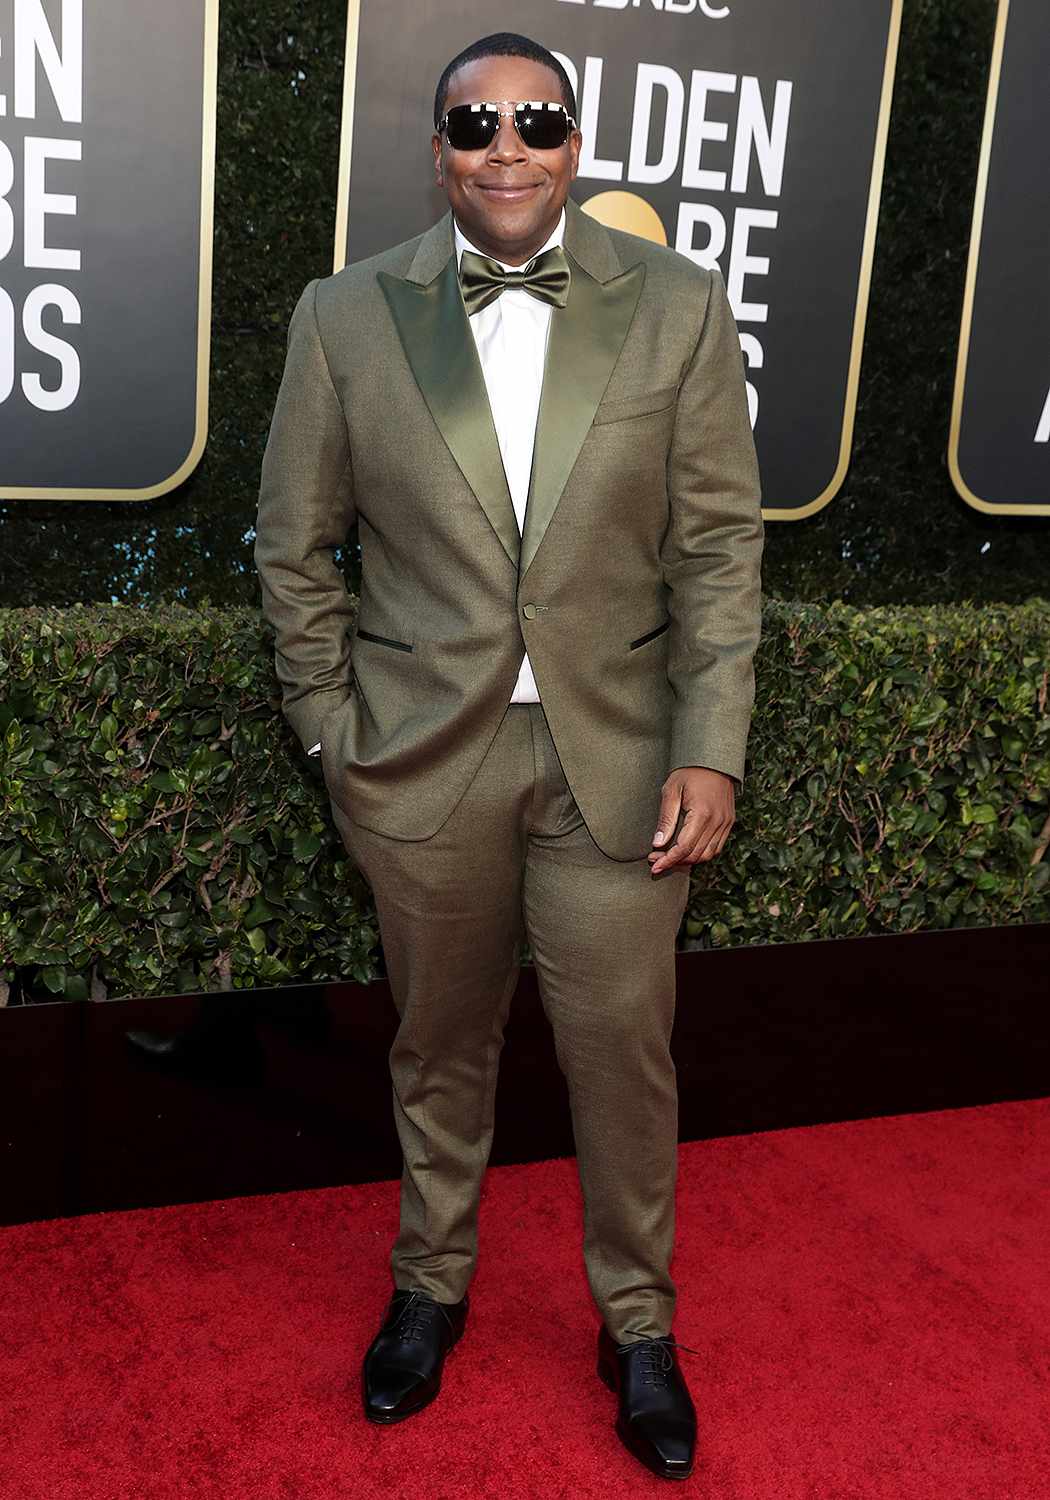 Pictured: Kenan Thompson attends the 78th Annual Golden Globe Awards held at The Beverly Hilton and broadcast on February 28, 2021